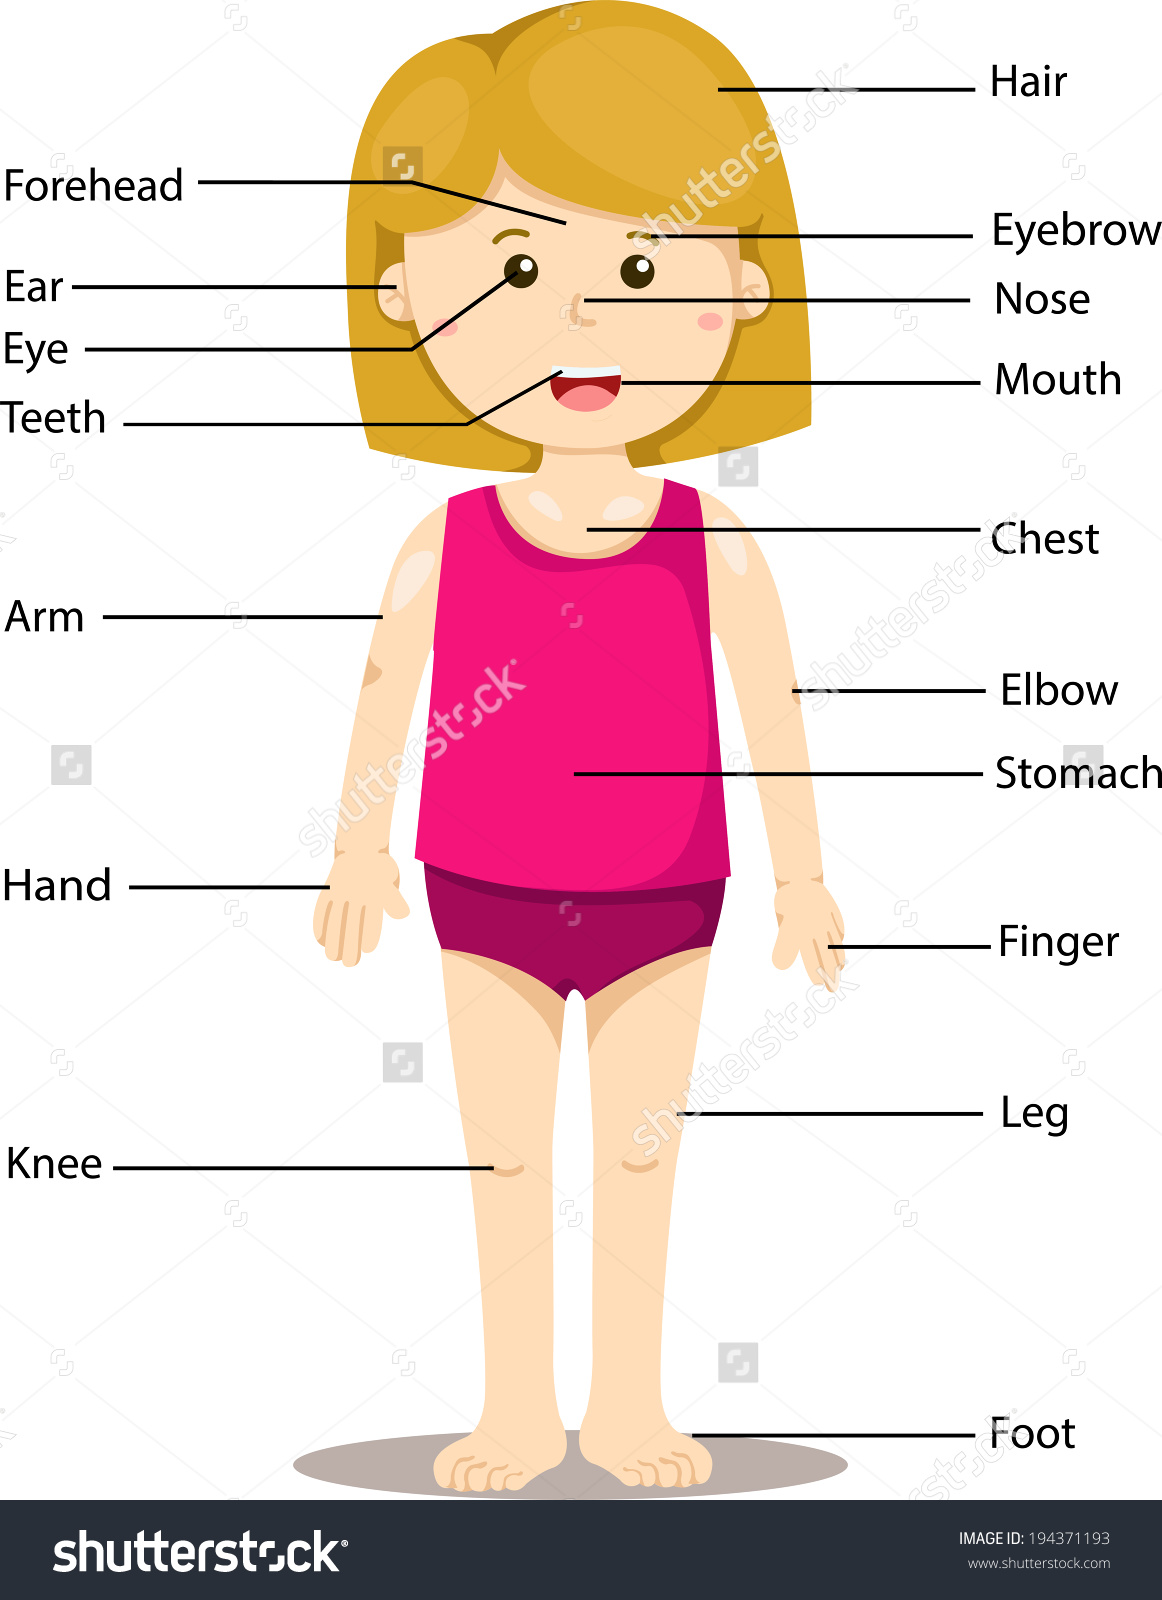 Body clipart illustration. Light clipground save to